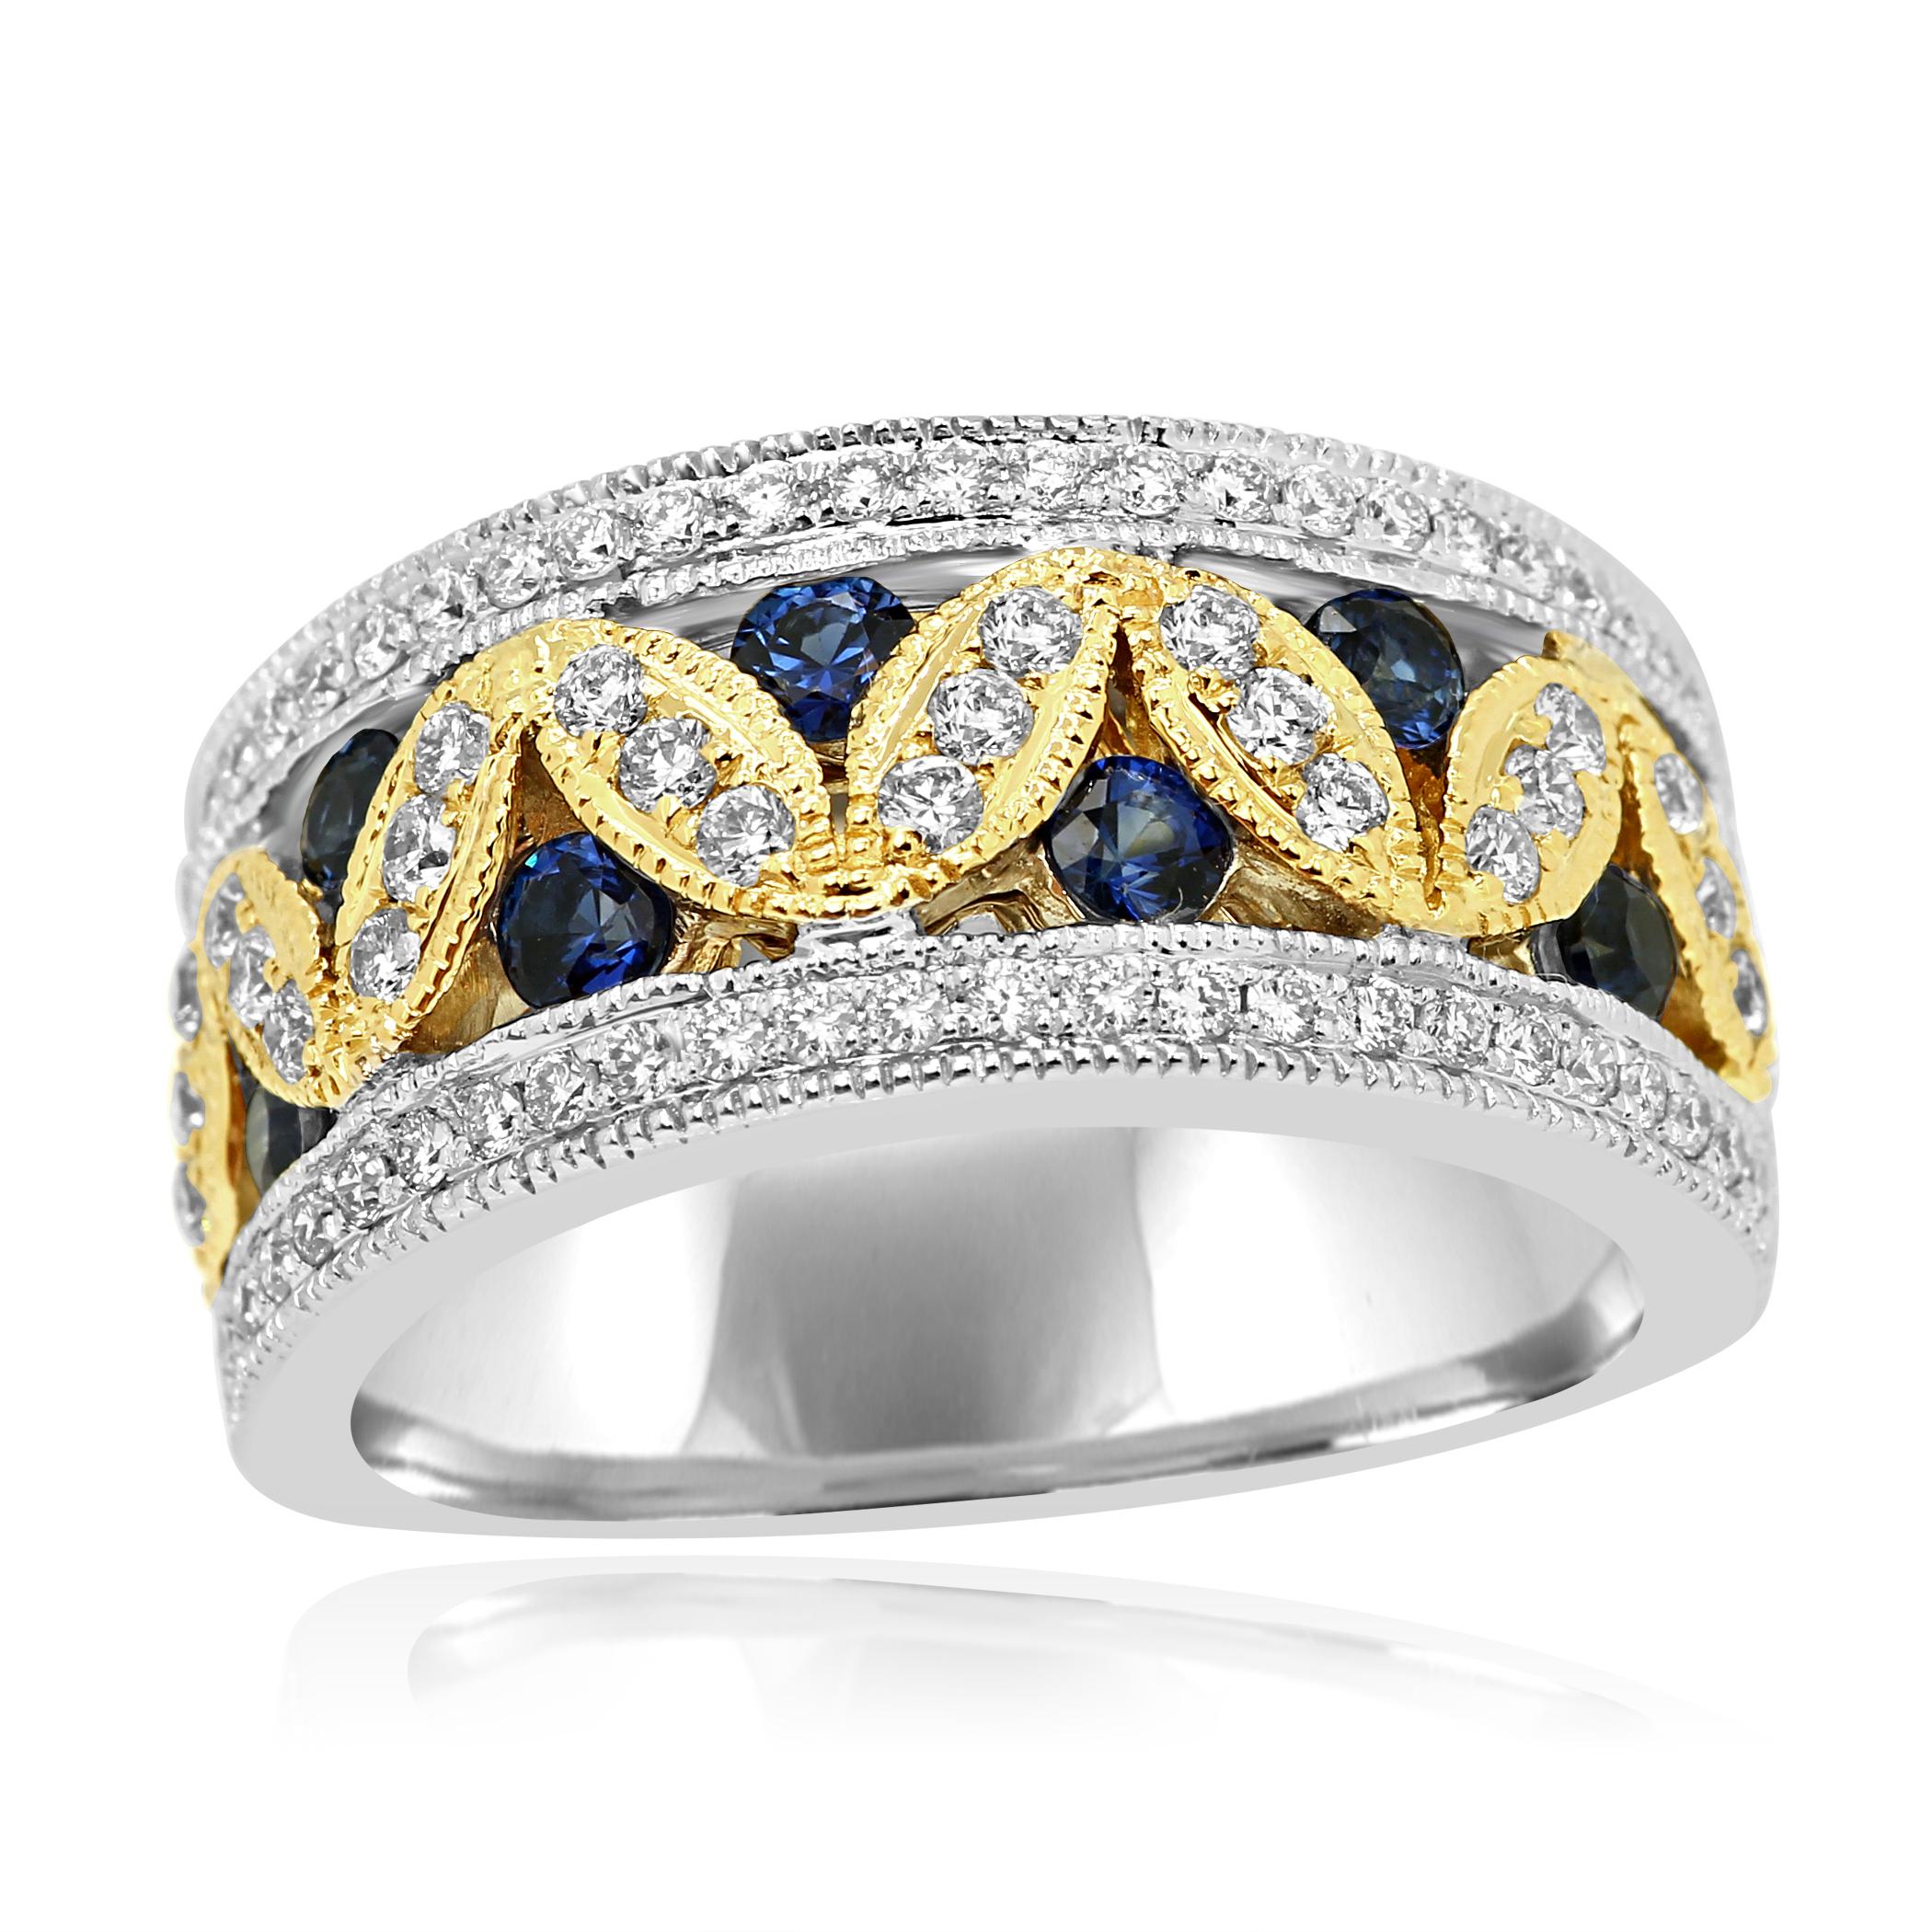 7 Blue Sapphire Round 0.57 Carat Set with White Diamond Rounds 0.58 Carats in a Stunning and Stylish 14K White and Yellow Gold Band Ring.

Total Blue Sapphire Weight 0.57 Carat
Total diamond Weight 0.58 Carat
   